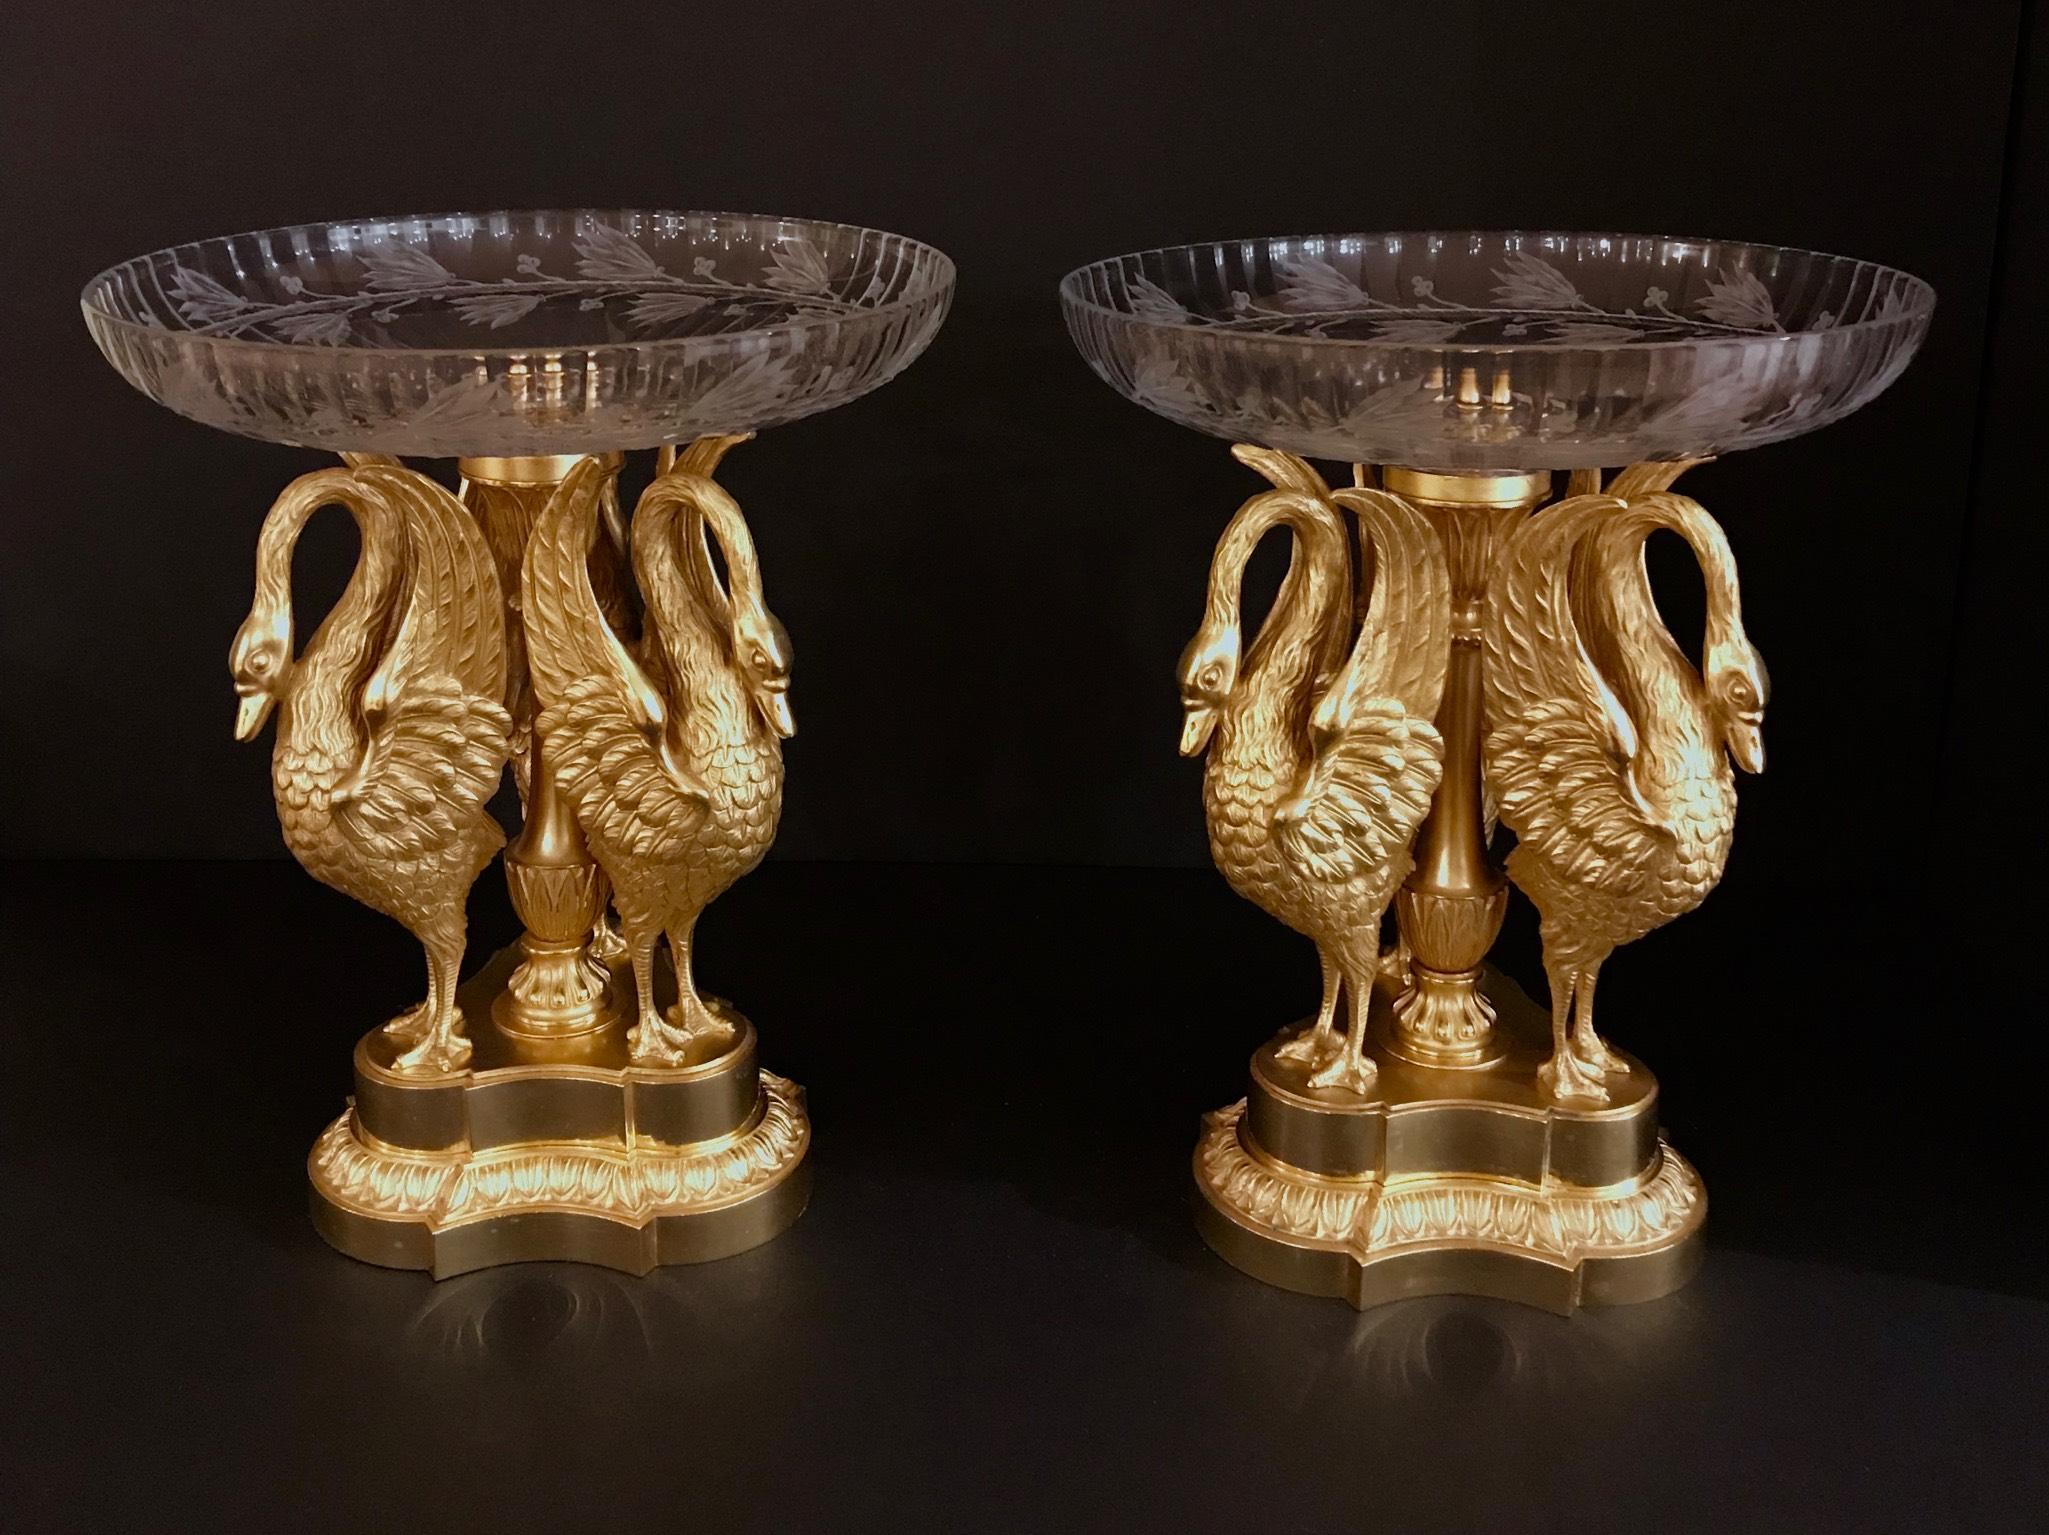 Engraved Pair of 19th Century Russian Ormolu and Baccarat Cut Crystal Swan Centerpieces For Sale